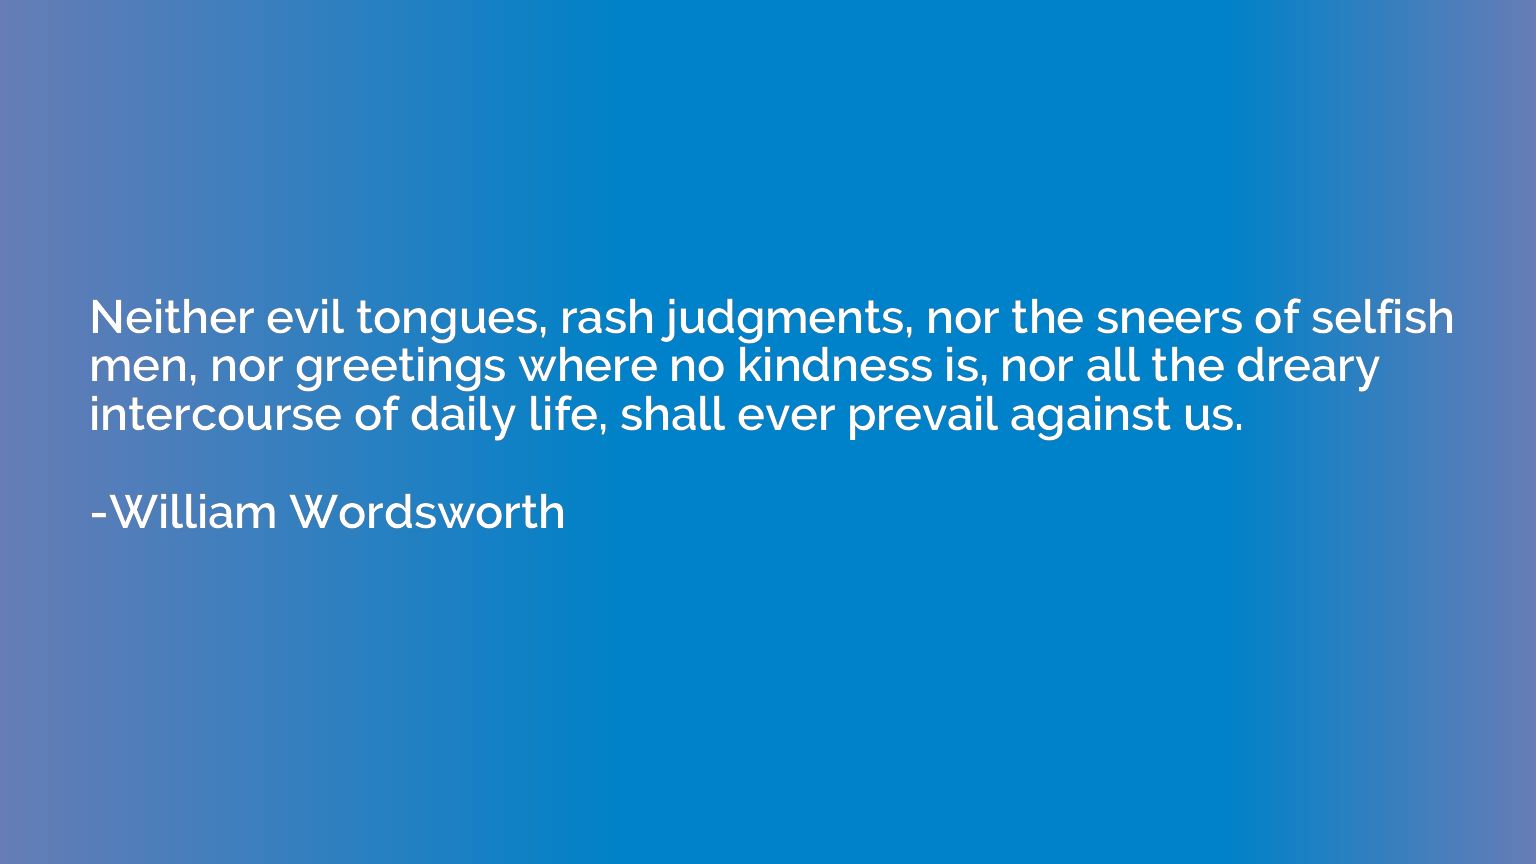 Neither evil tongues, rash judgments, nor the sneers of self